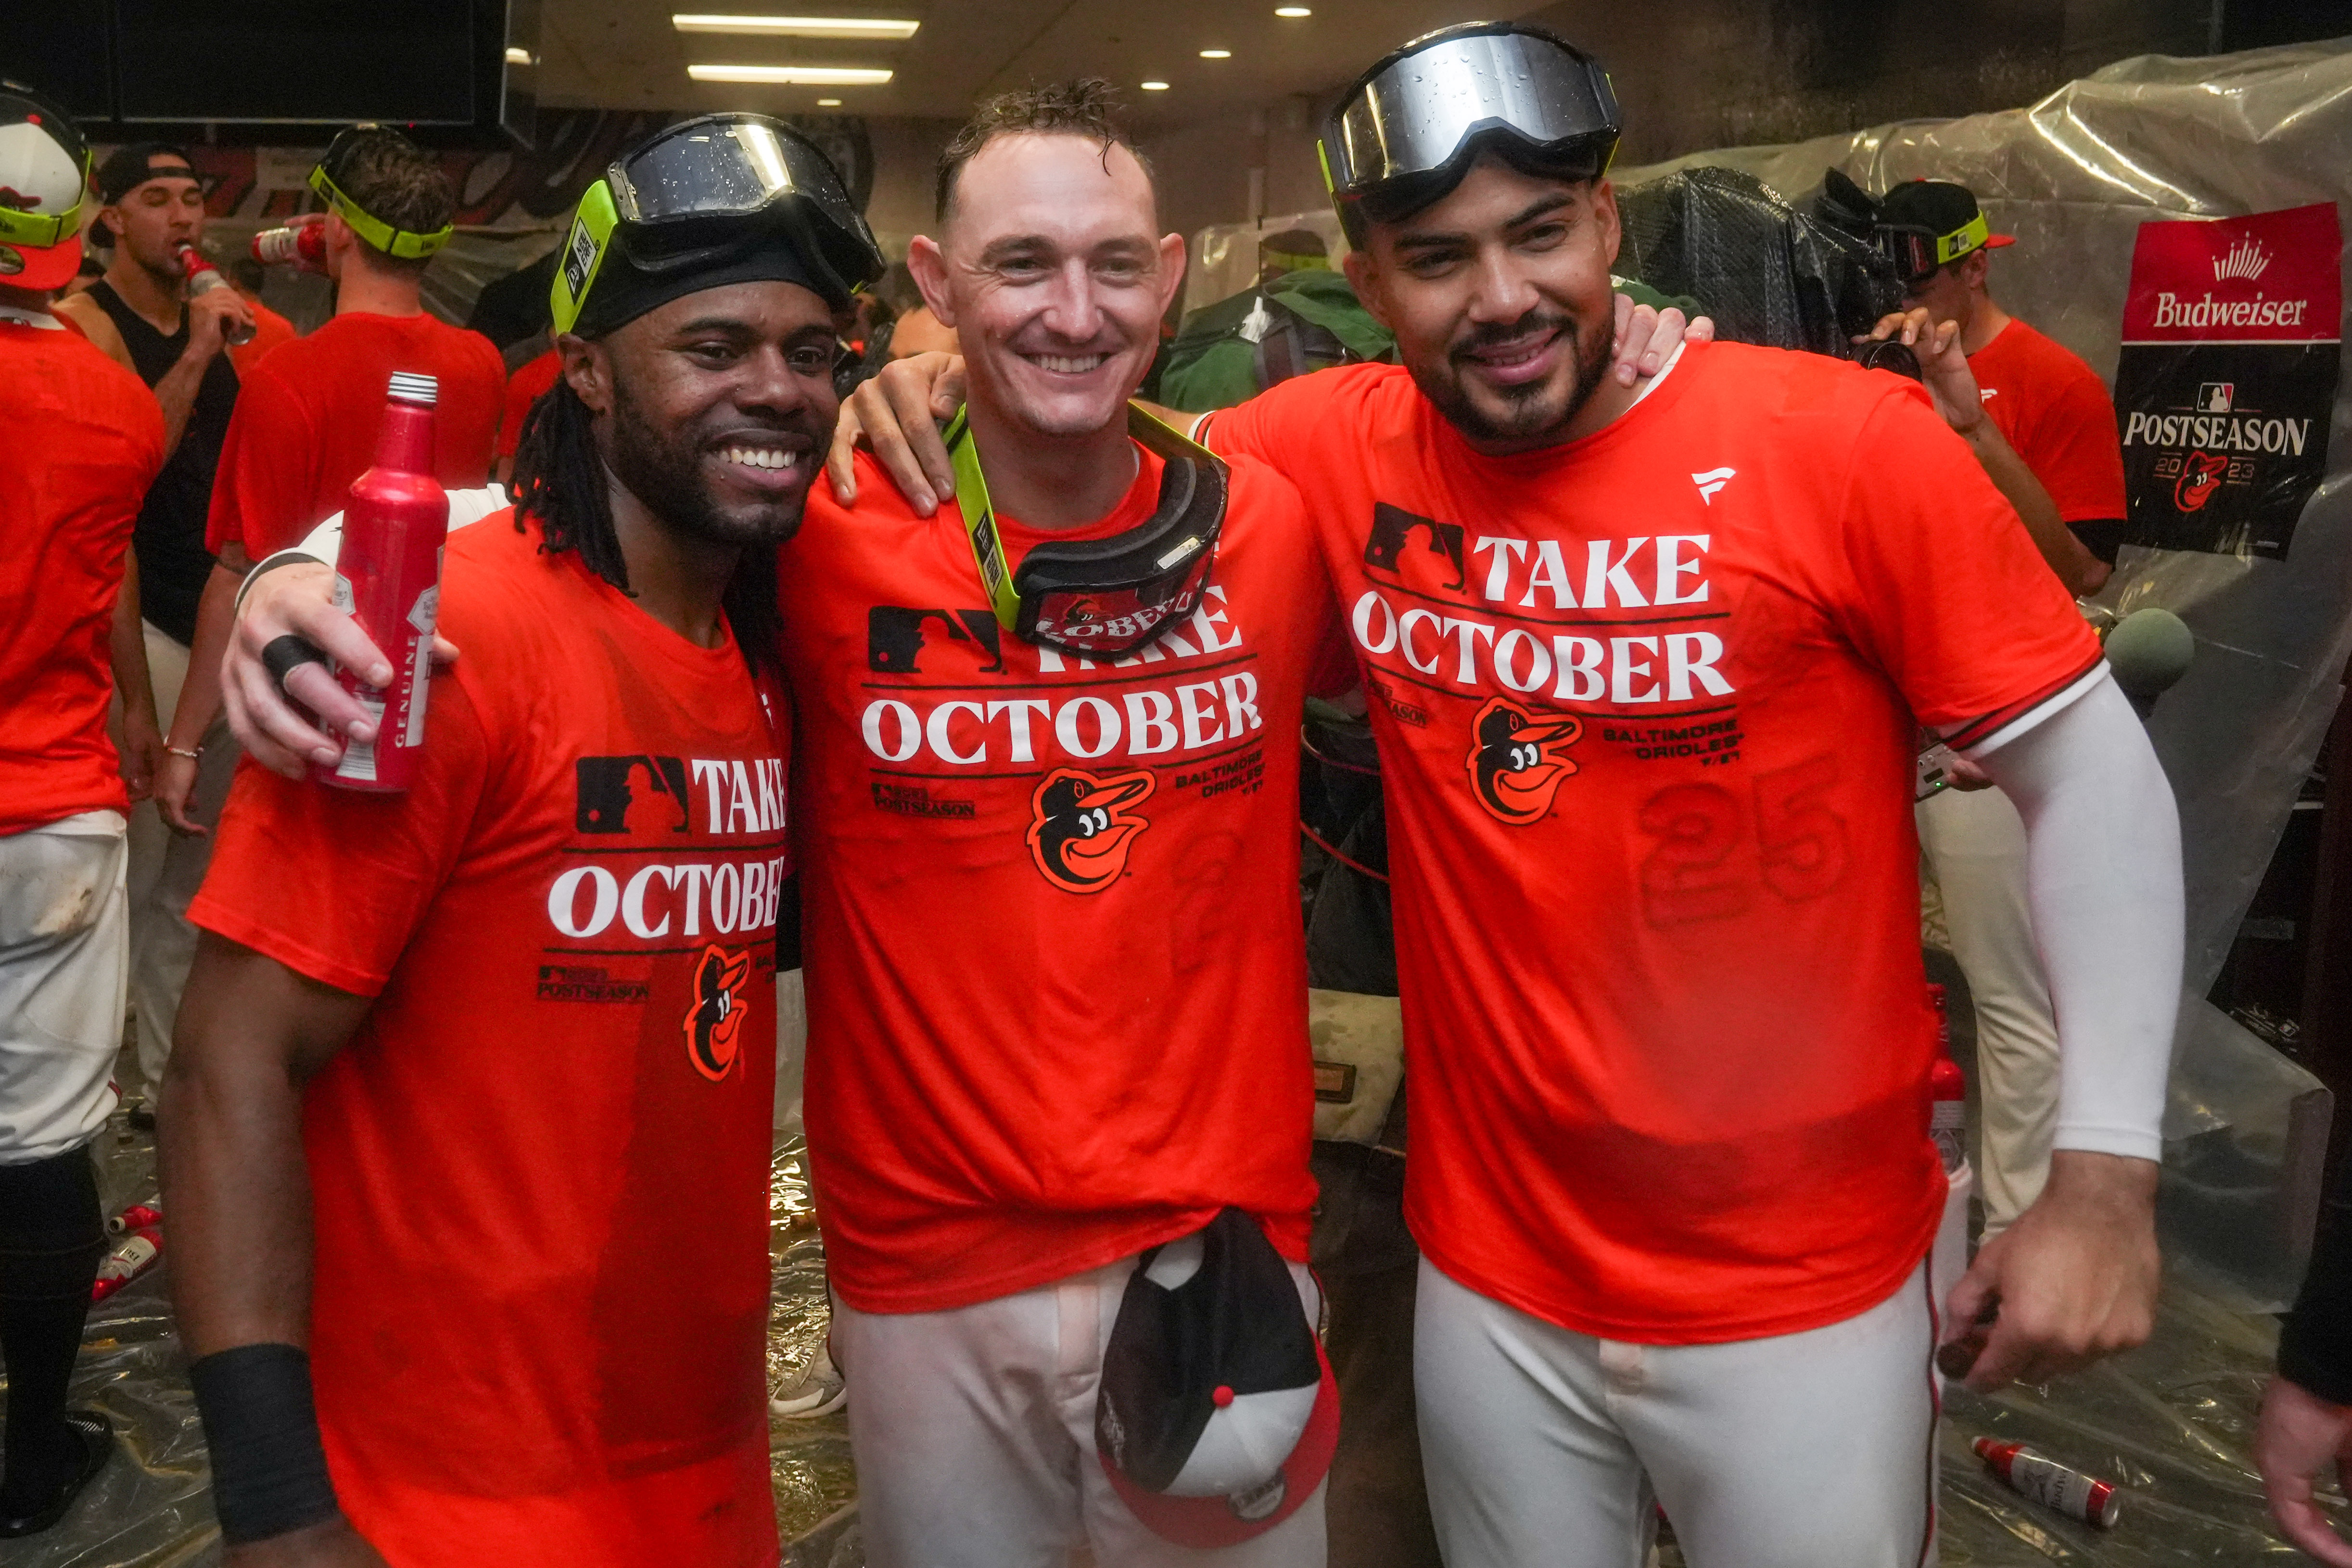 Orioles announce 'Soak It In' postseason events throughout Baltimore area